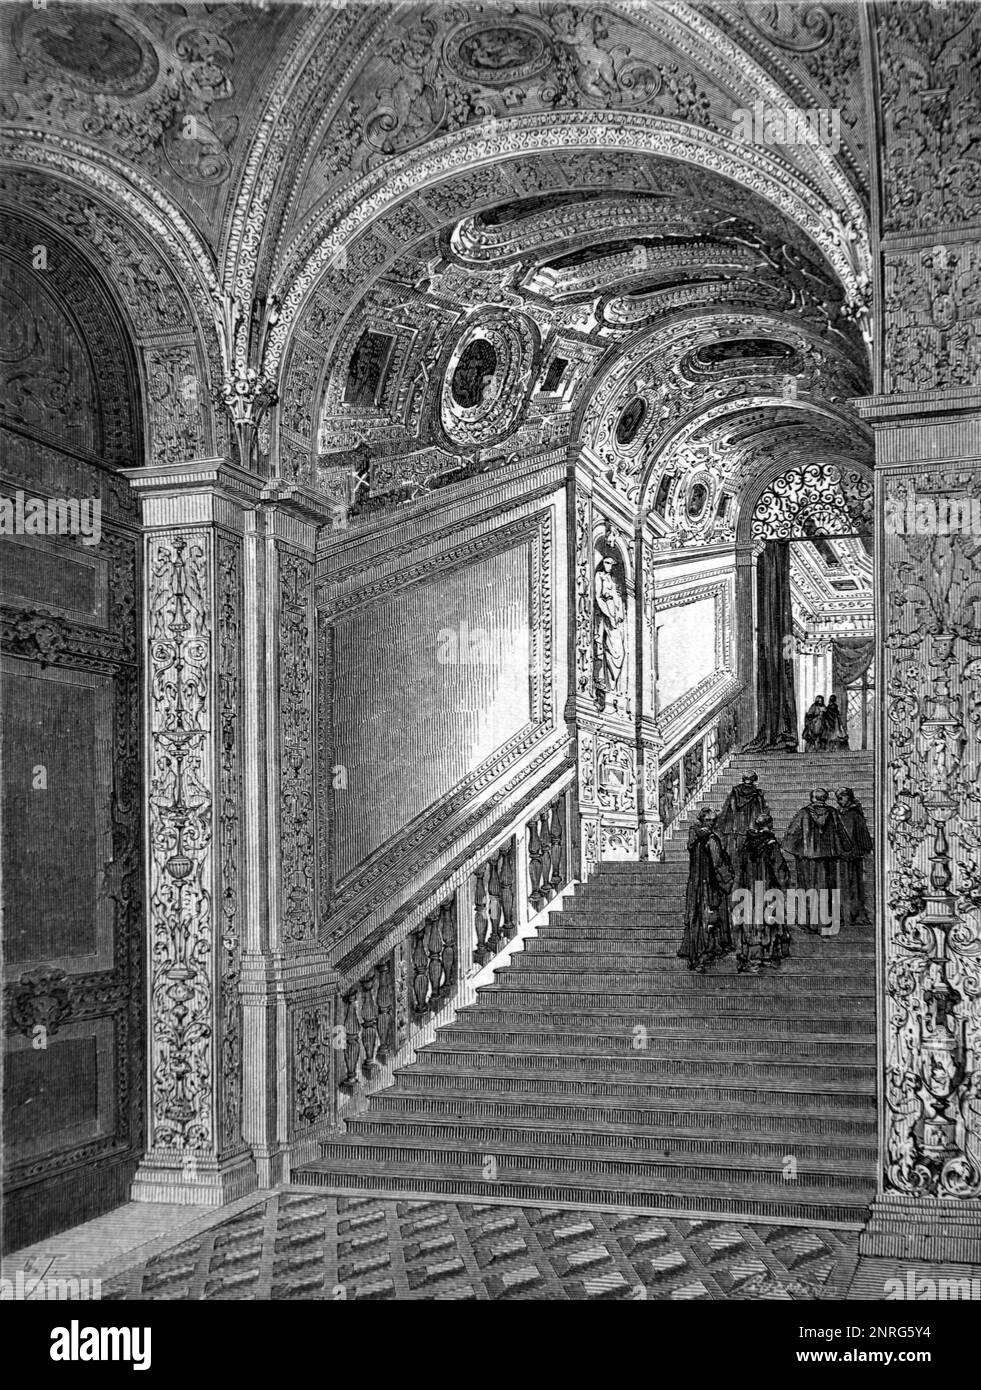 Monumental Staircase or Main Staircase in Interior of the Doge's Palace, or Palace of the Doge (1340), now an Art Museum, Venice, Italy. Vintage Engraving or Illustration 1862 Stock Photo